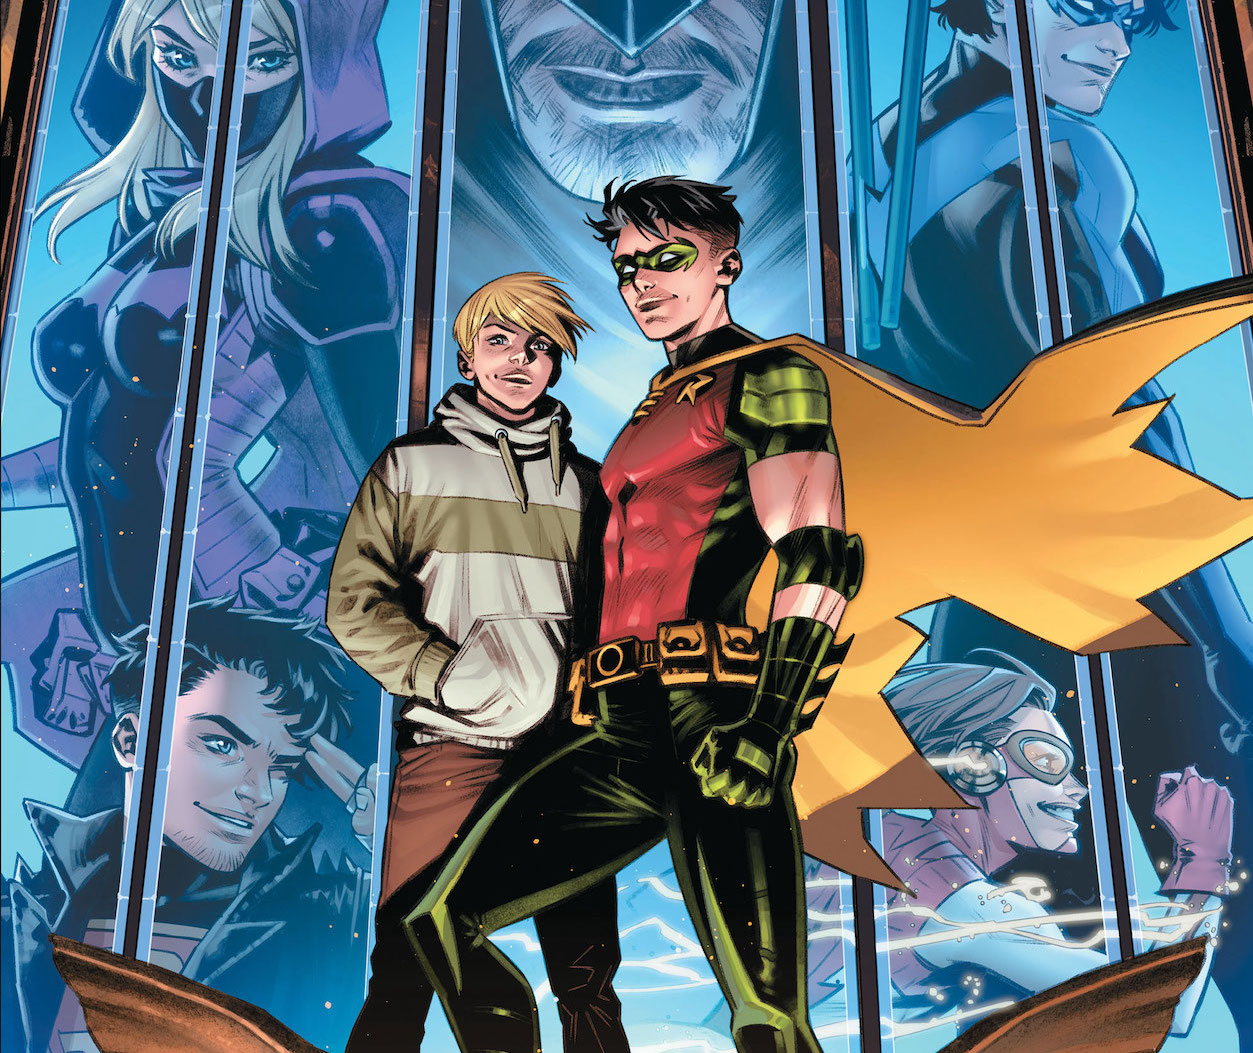 'DC Pride: Tim Drake Special' #1 is a heartwarming story